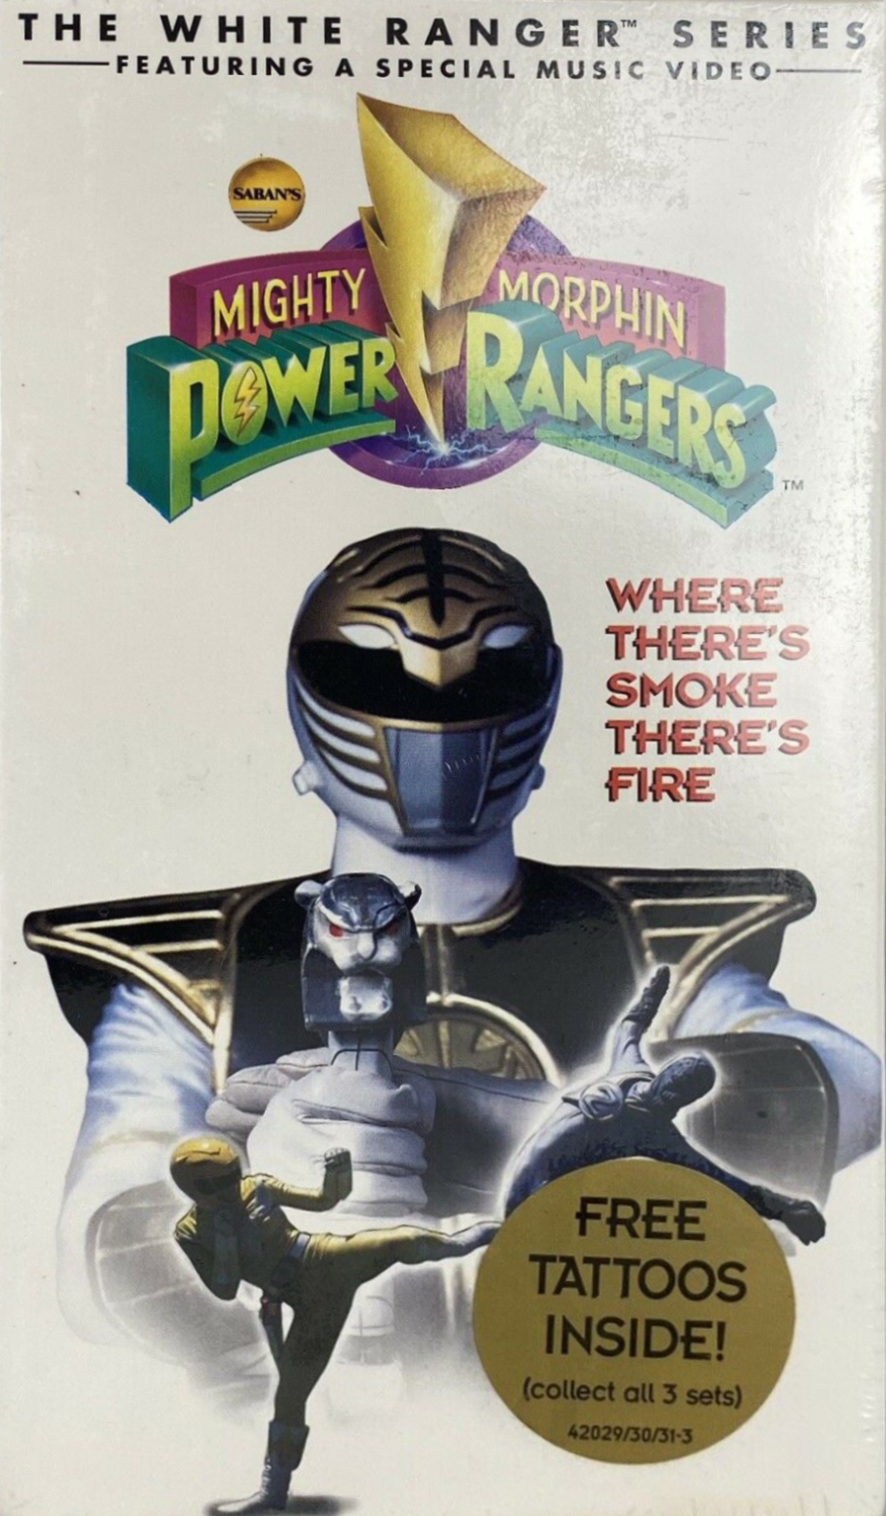 The White Ranger Series: Where There's Smoke There's Fire